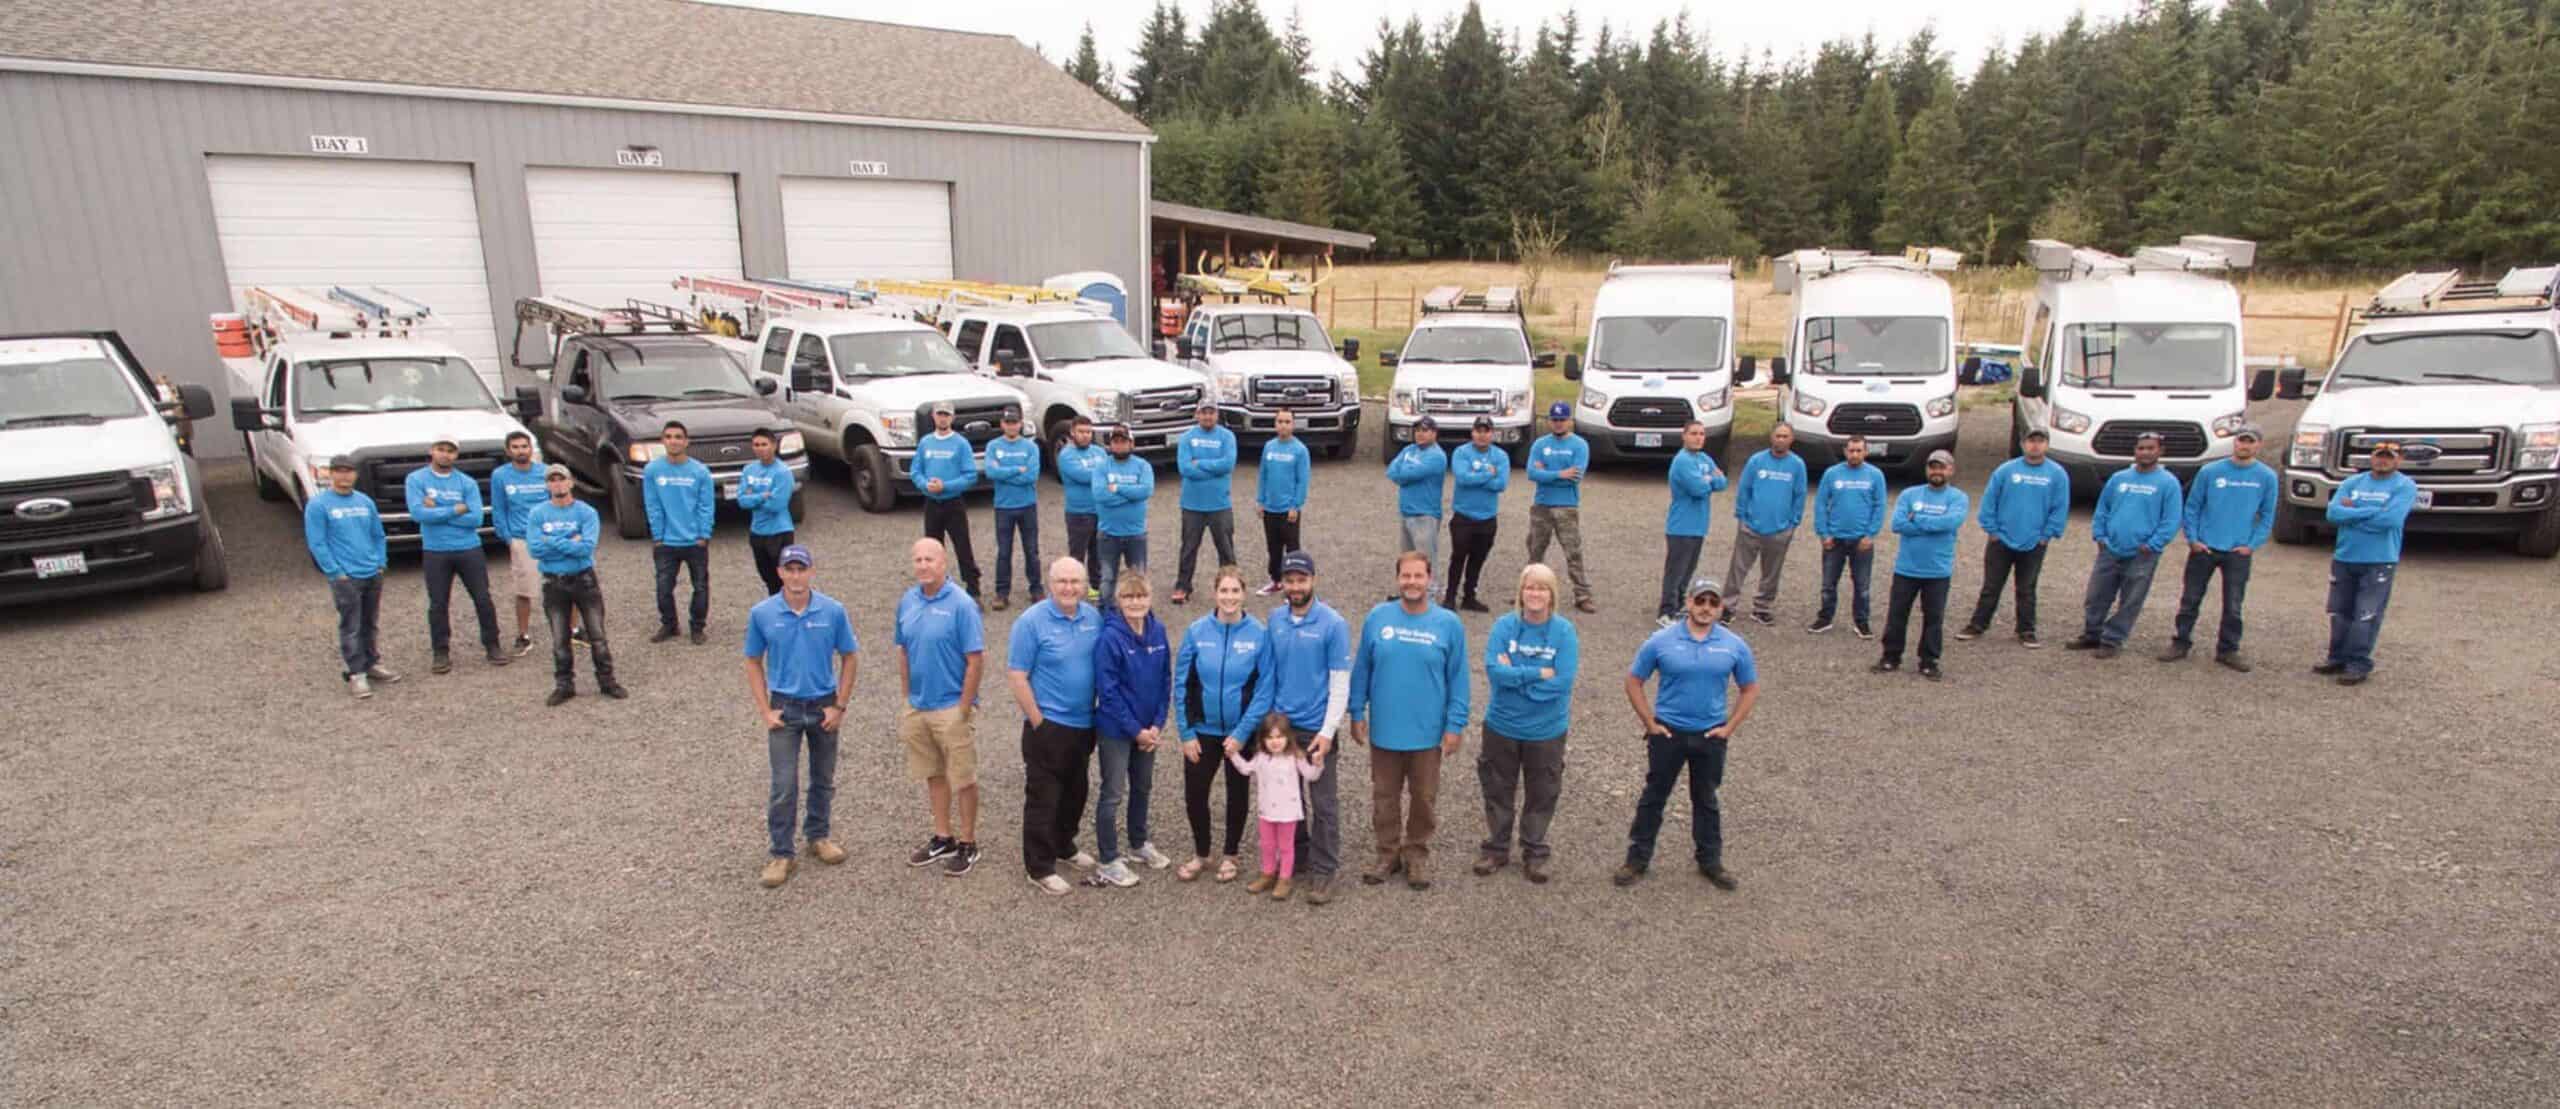 The Valley Roofing Crew in July of 2017 located in Salem, Oregon